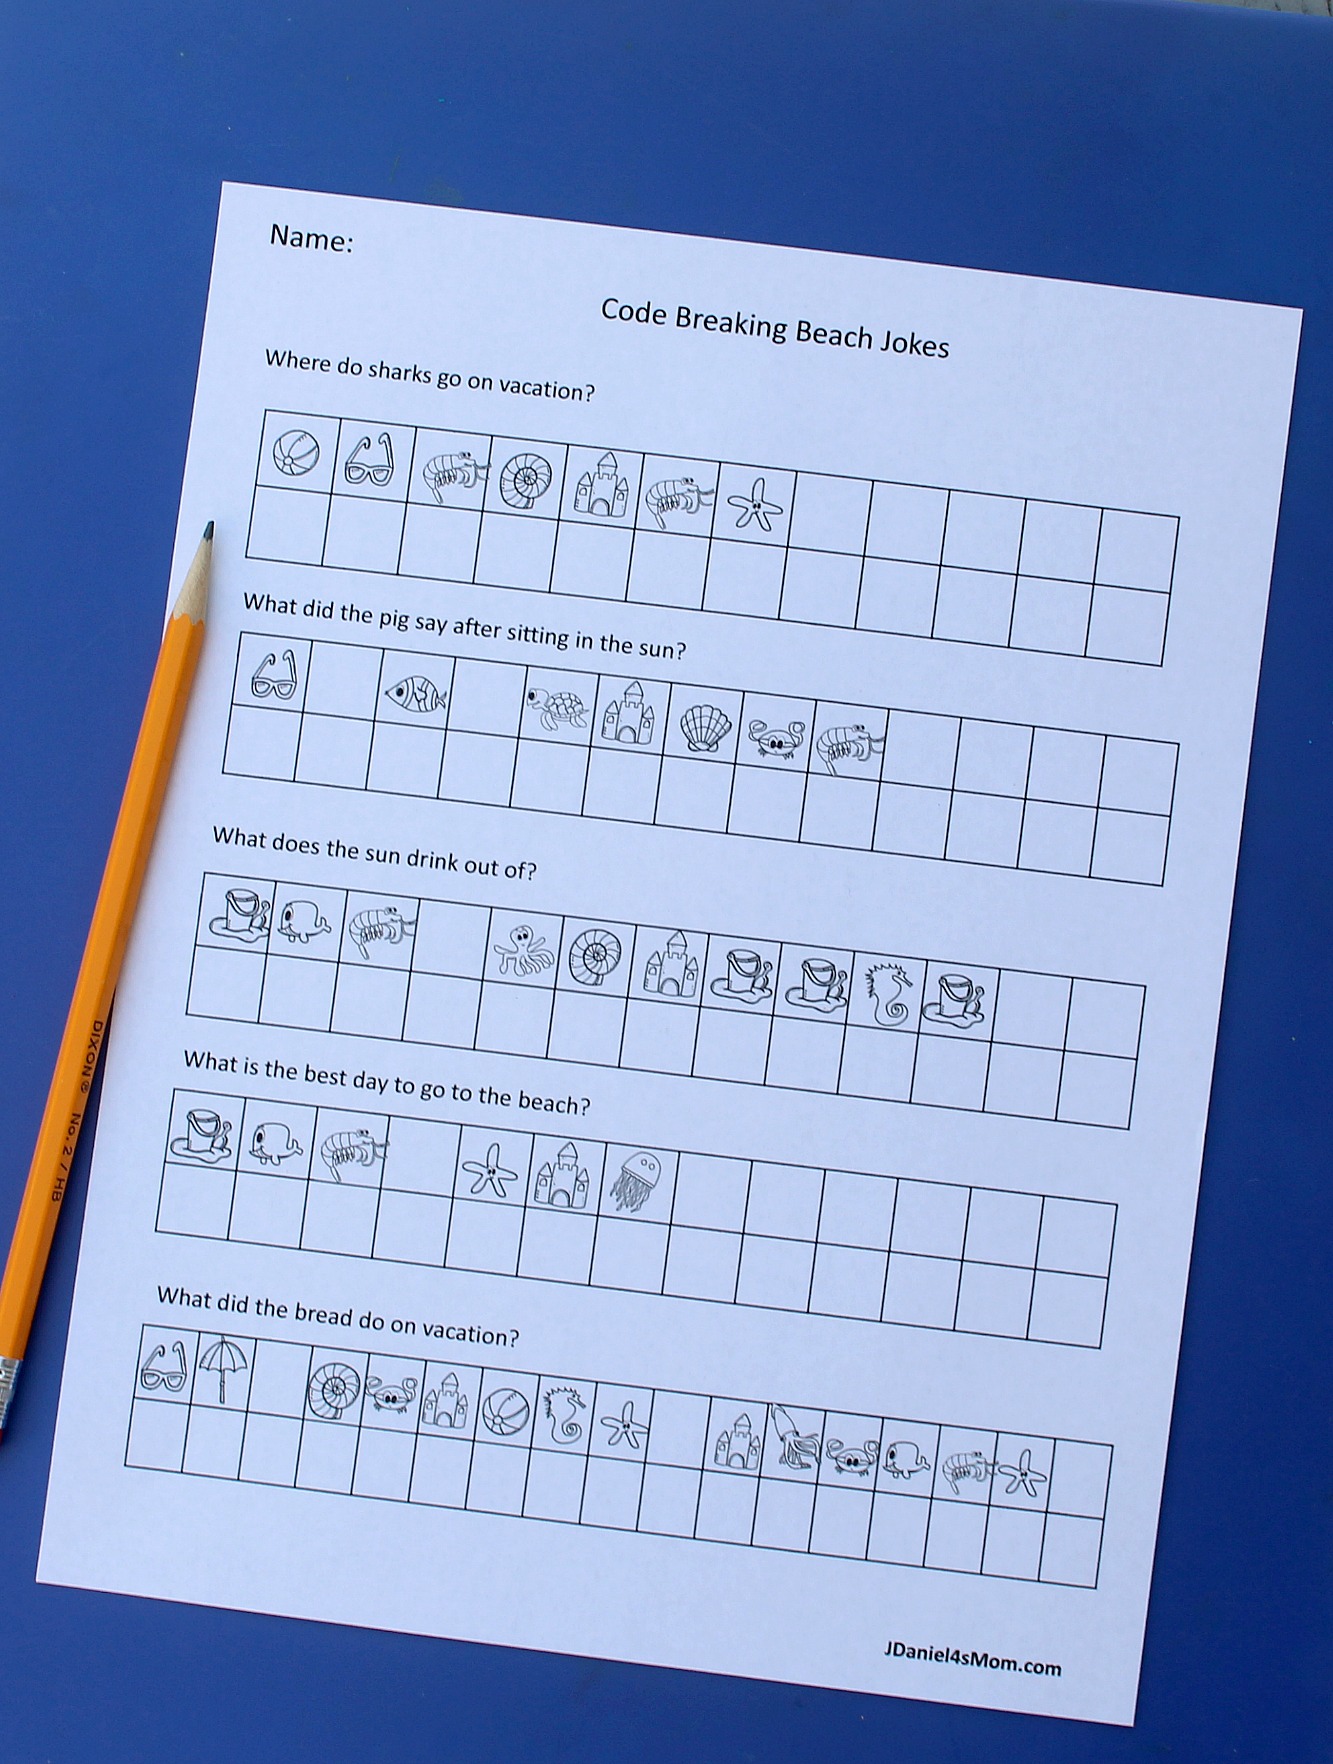 Ocean Jokes Code Breaker Worksheets for Kids - There are two worksheets and code breaking chart in this set.